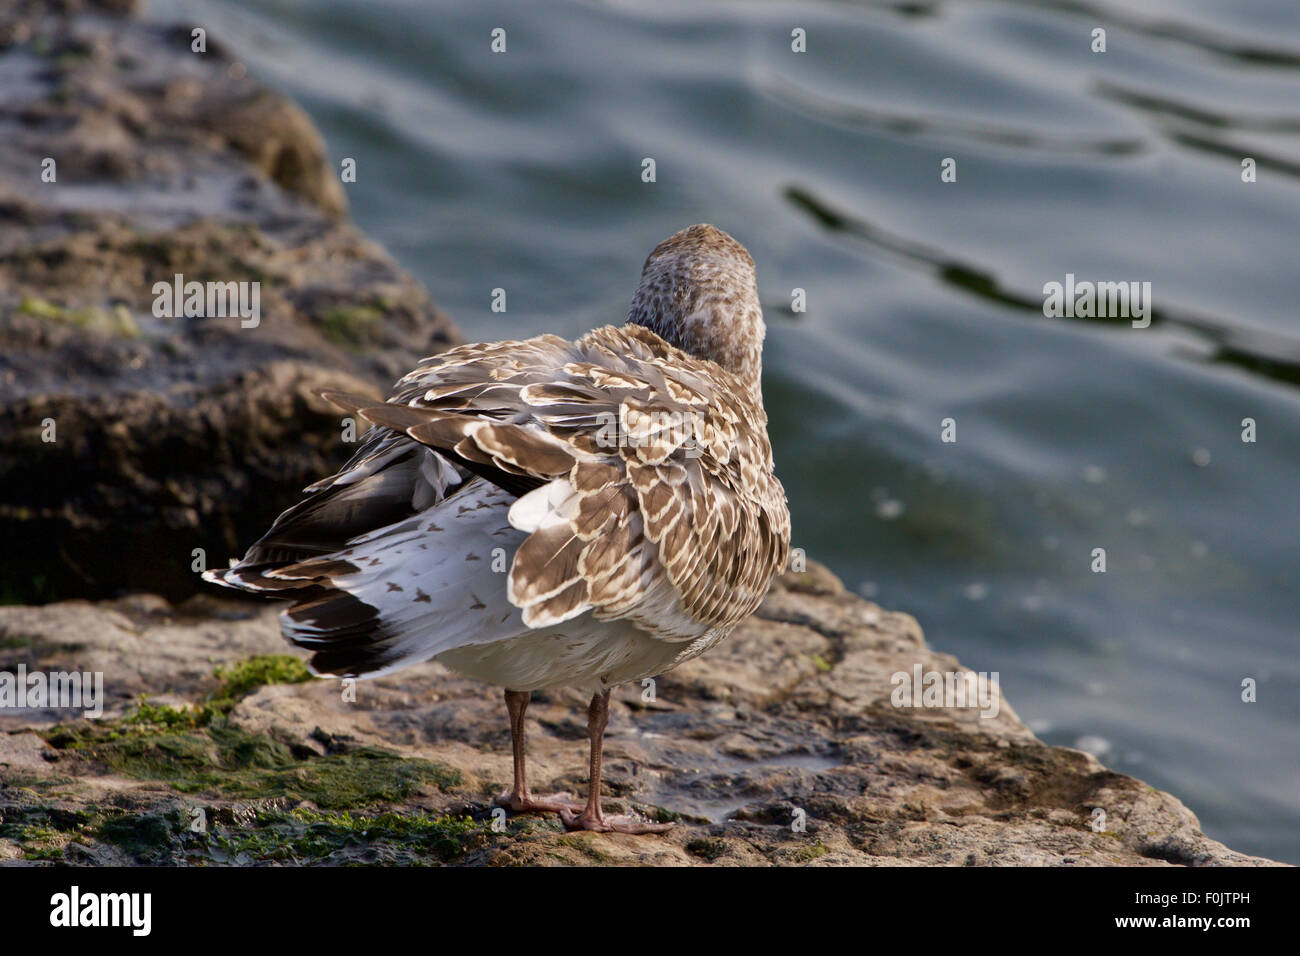 The lesser black-backed gull is shaking her feathers on the shore Stock Photo